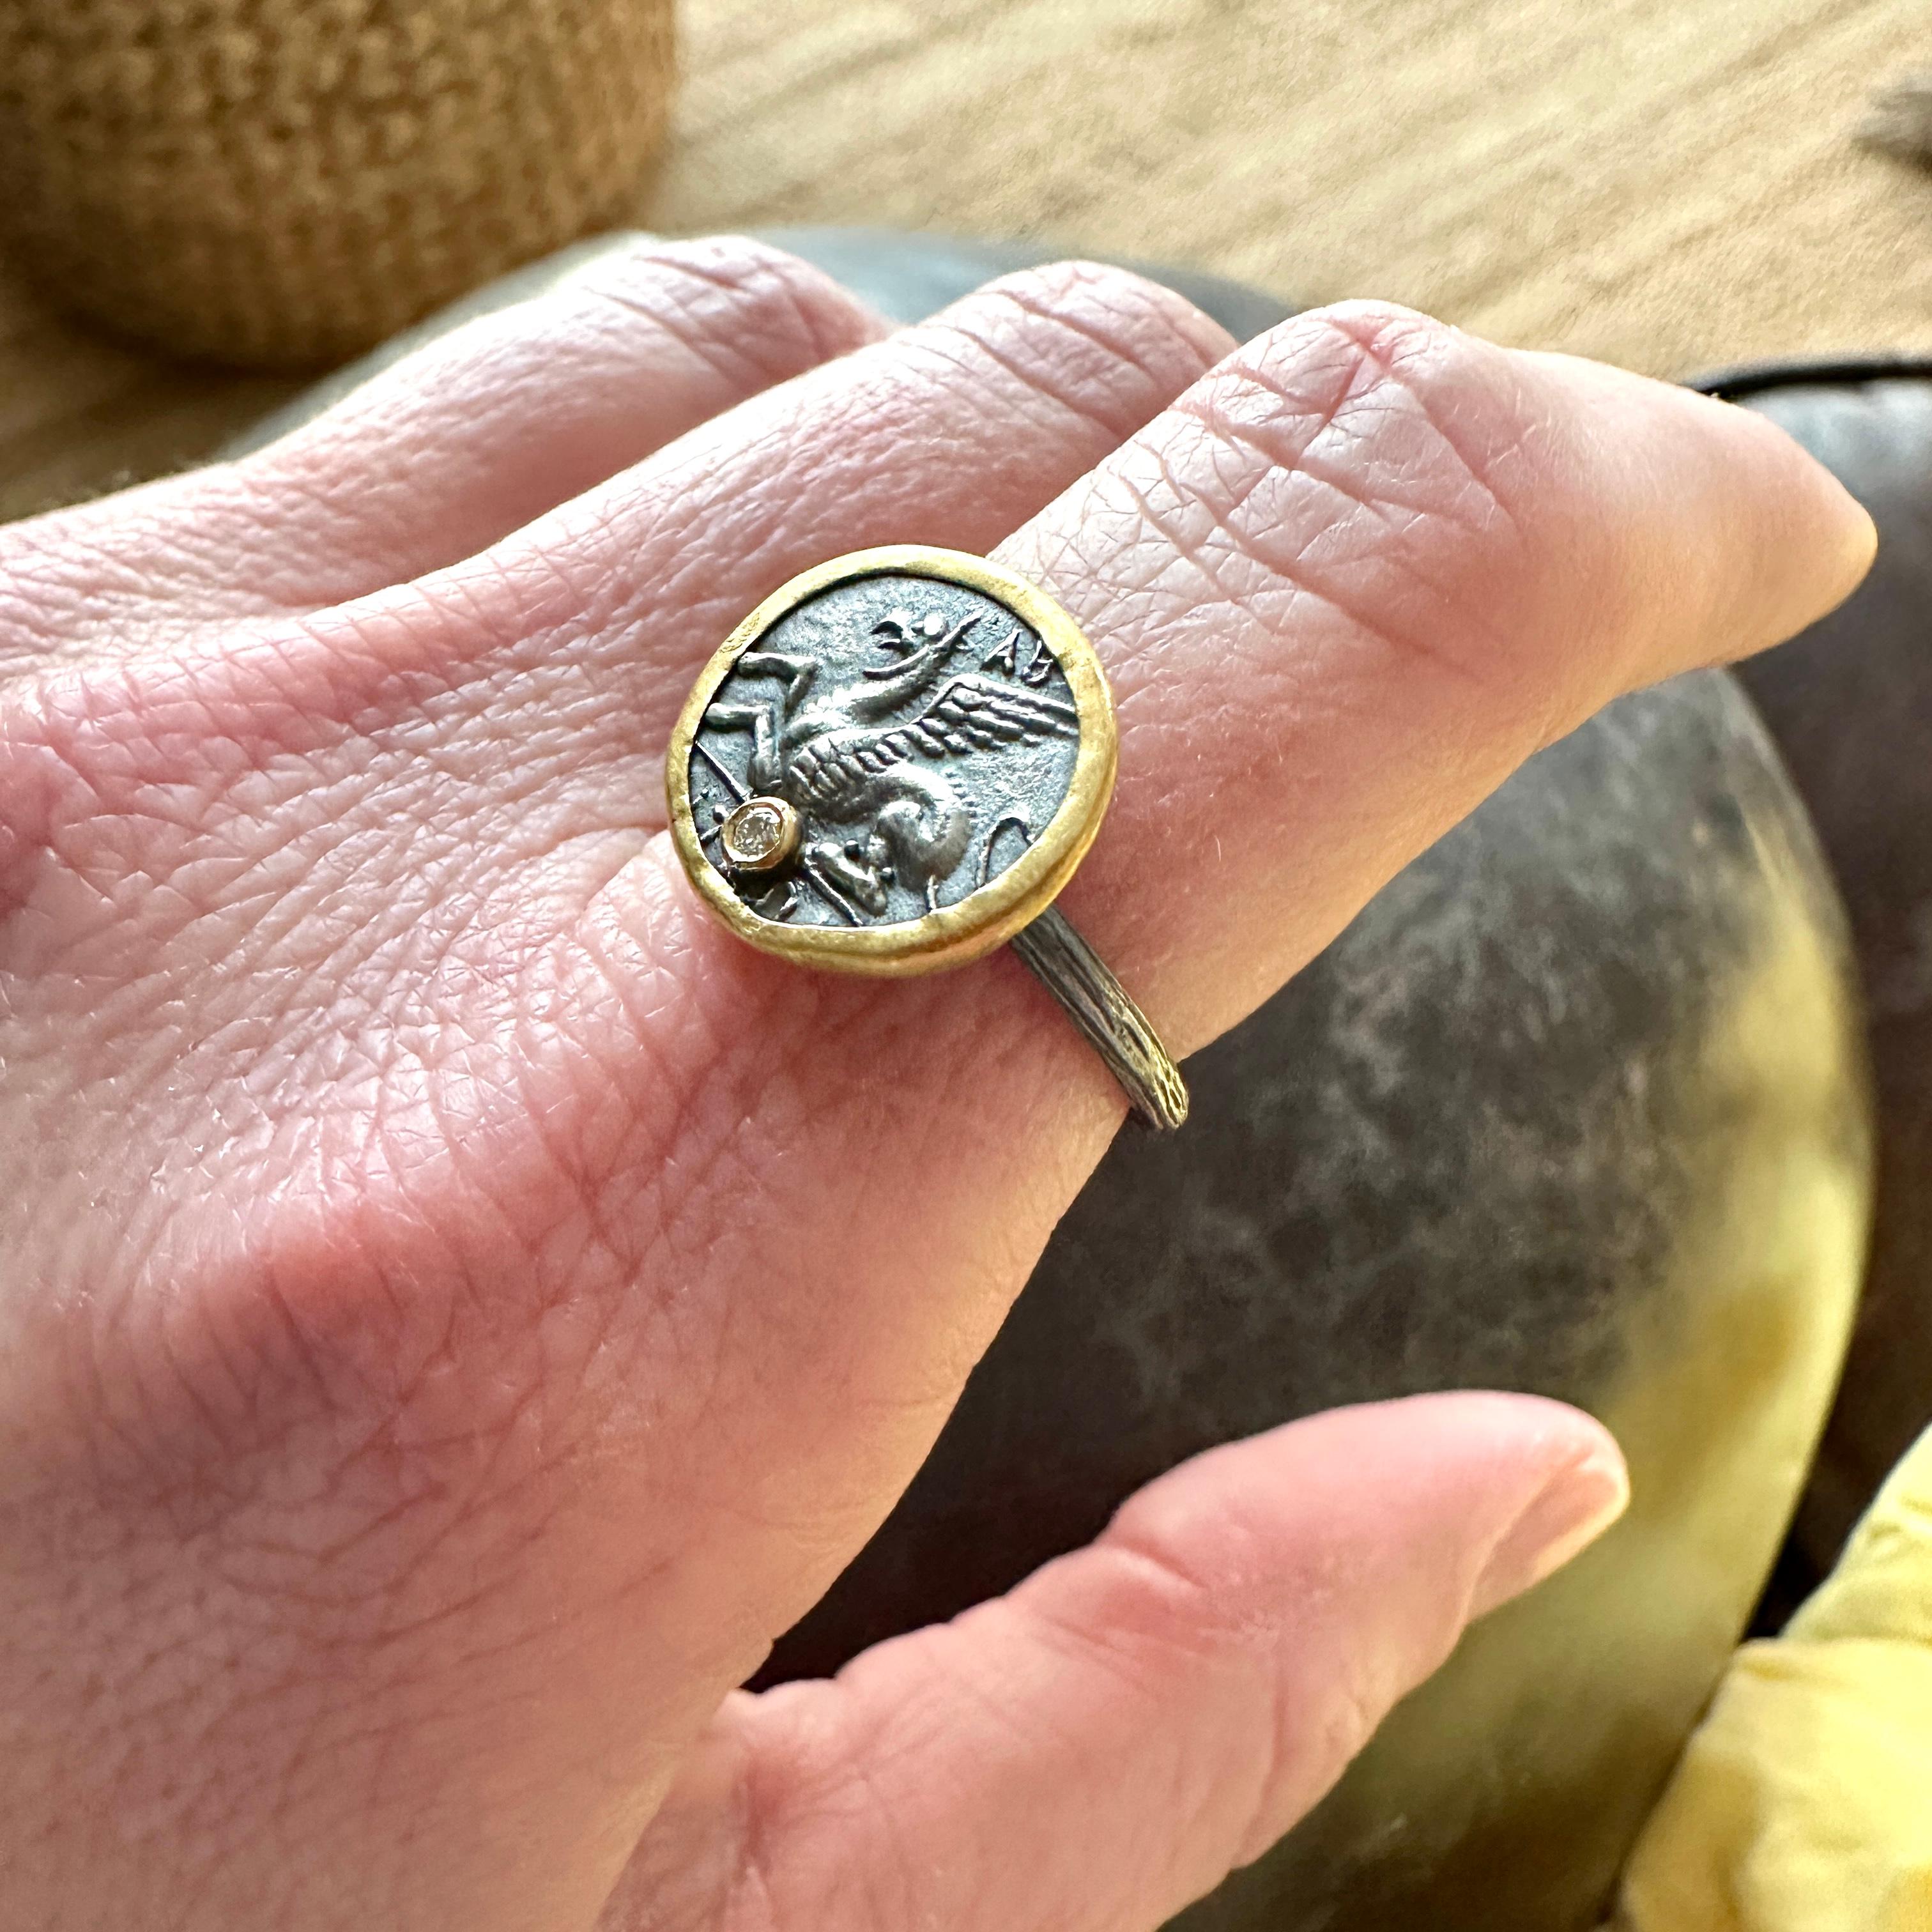 Ancient Pegasus Coin Ring with Diamond, in 24kt Gold and Silver by Prehistoric Works of Istanbul, Turkey. Diamond - 0.02cts, Size 6 1/2 US. For custom sizes please contact the gallery directly. Custom orders take approximately 3-6 weeks.